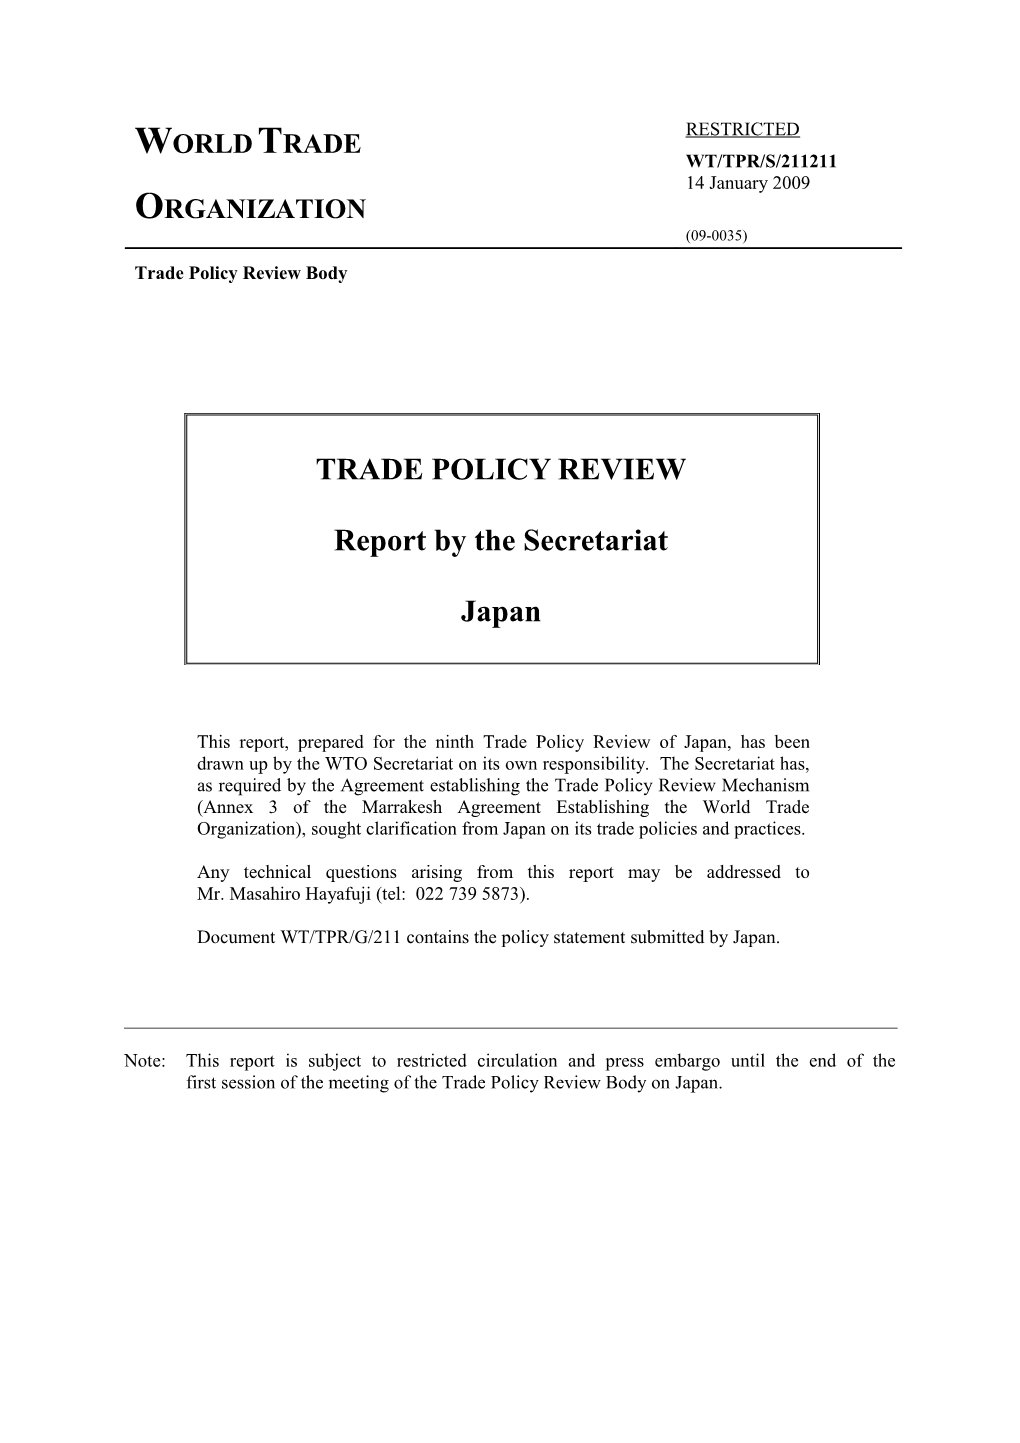 (2) Trade Policy Regime: Framework and Objectives Vii